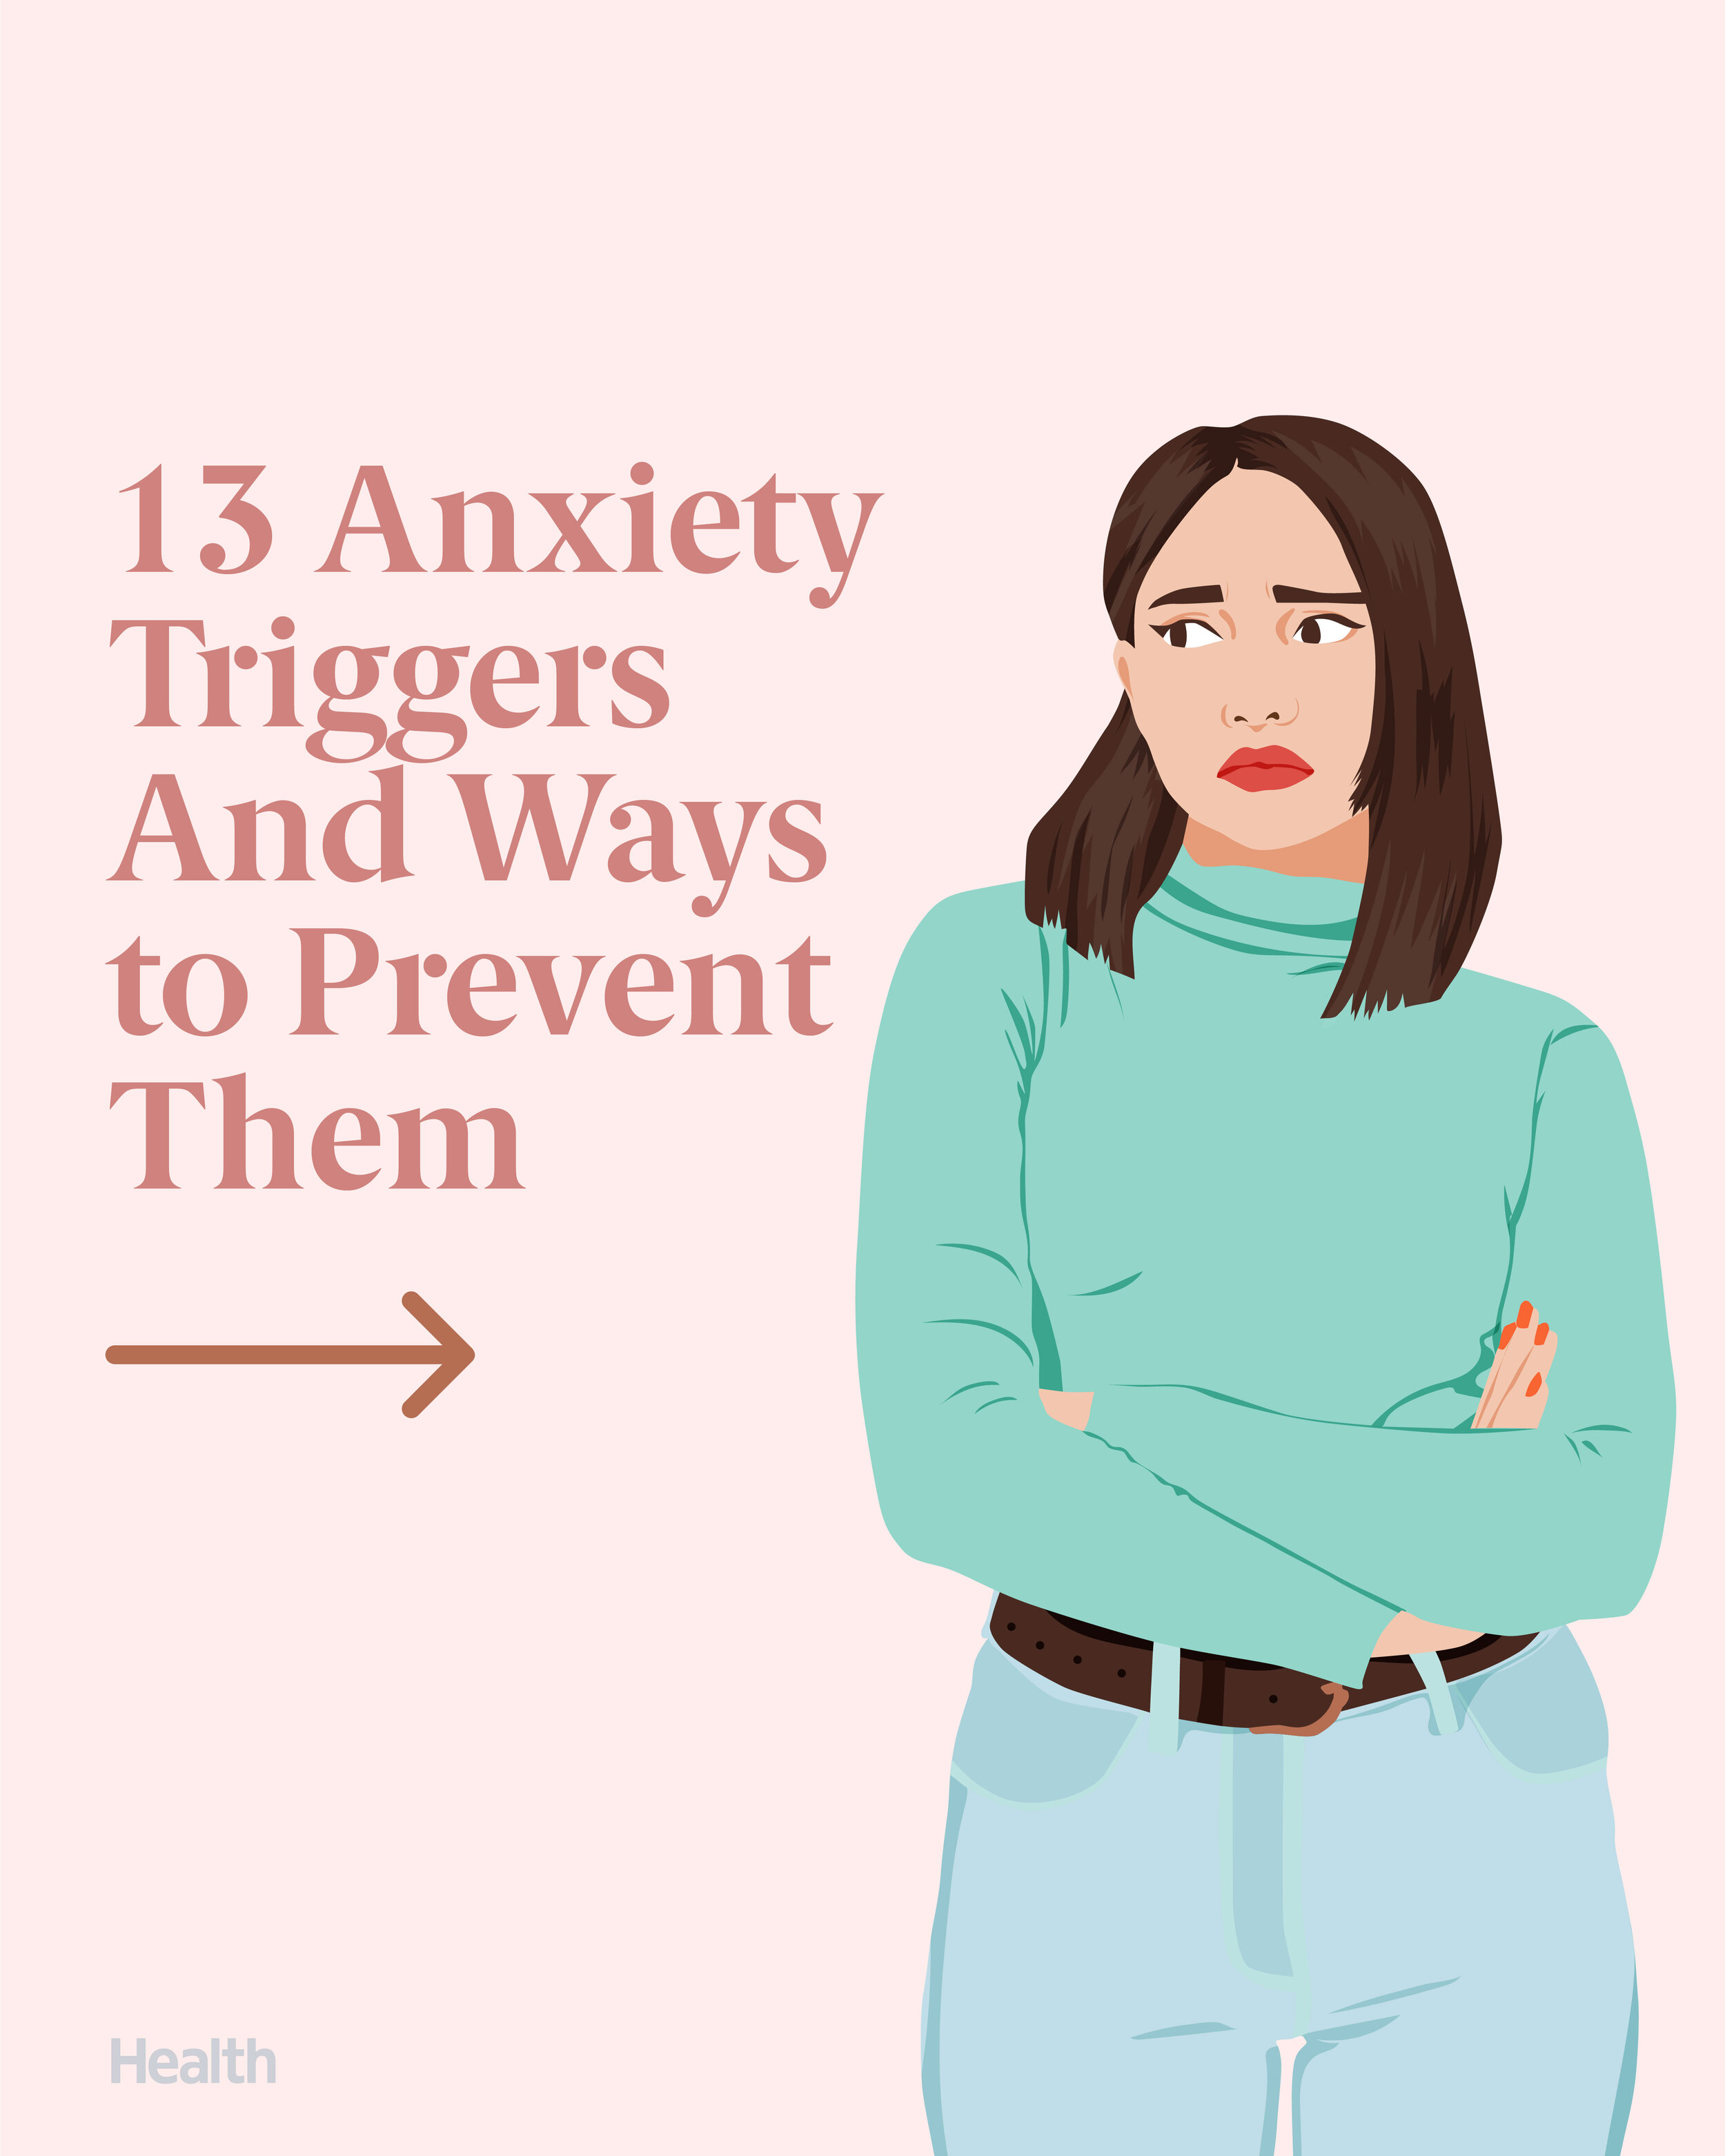 13 Anxiety Triggers And Ways to Prevent Them_1.jpg